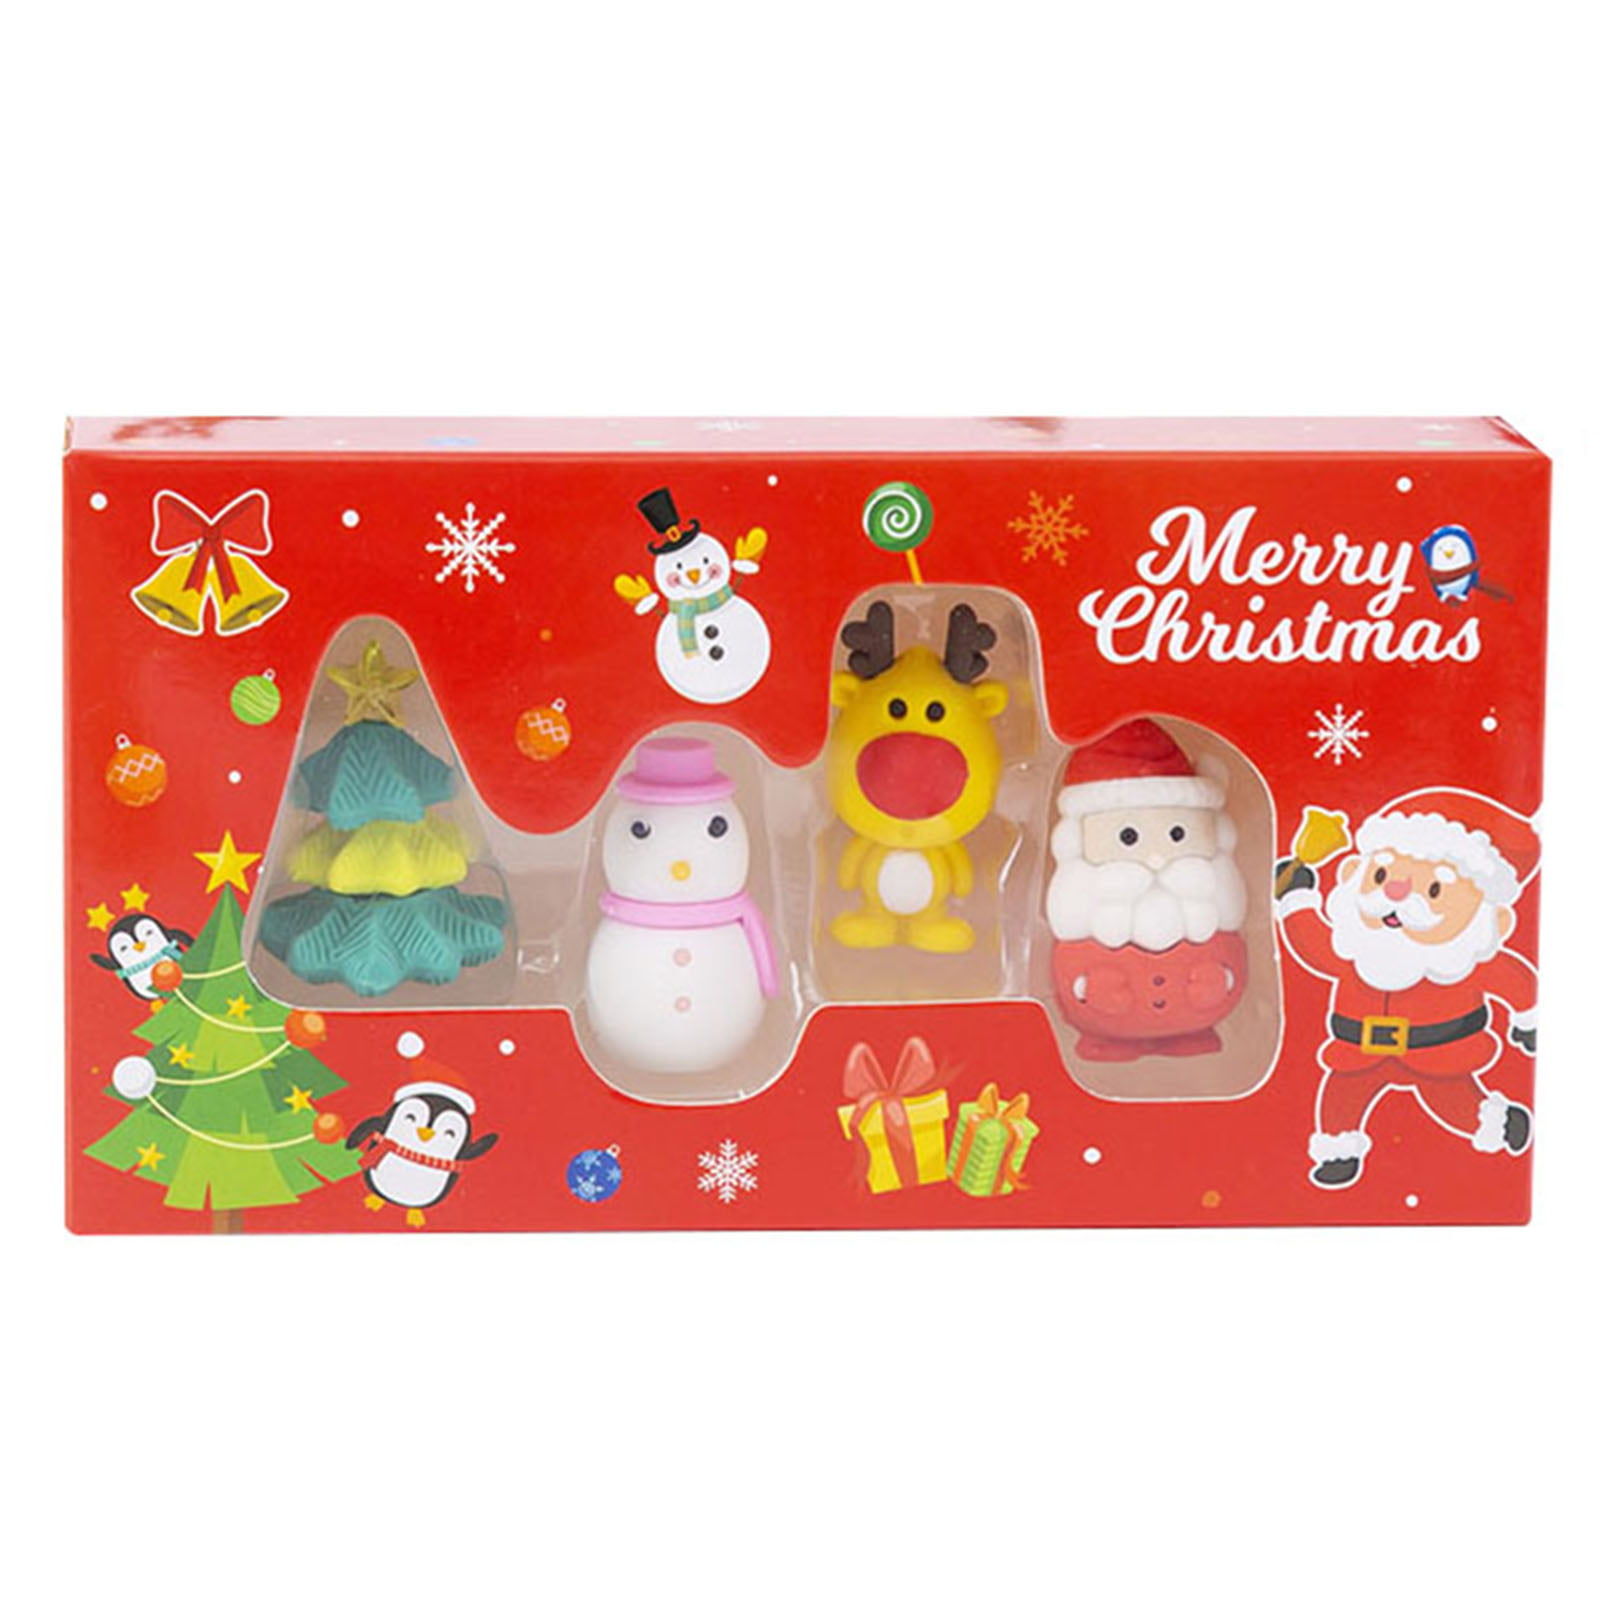 Pack of 26Pcs Novelty Xmas Erasers Mini Cartoon Rubber Erasers for Children Gift 